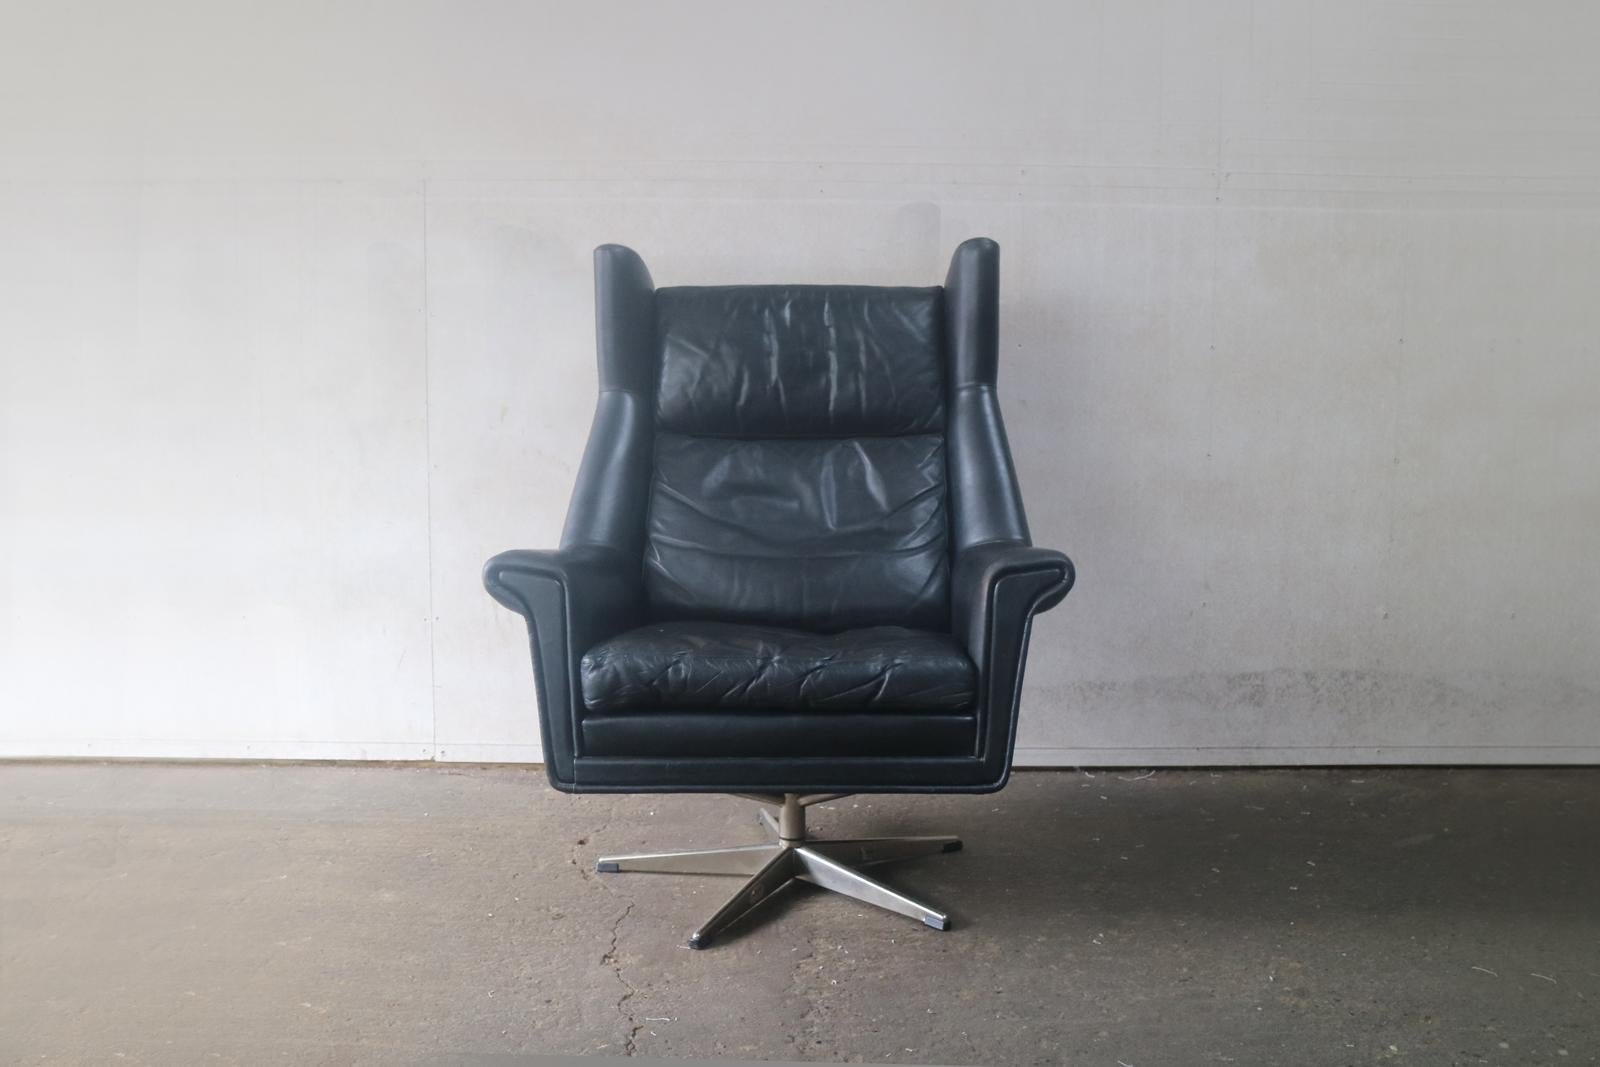 Super stylish Danish Mid-Century Modern armchair with the original black leather upholstery. Great angular design lines and the top of the chair has distinctive ‘wingtips’ fabulous piece.
 